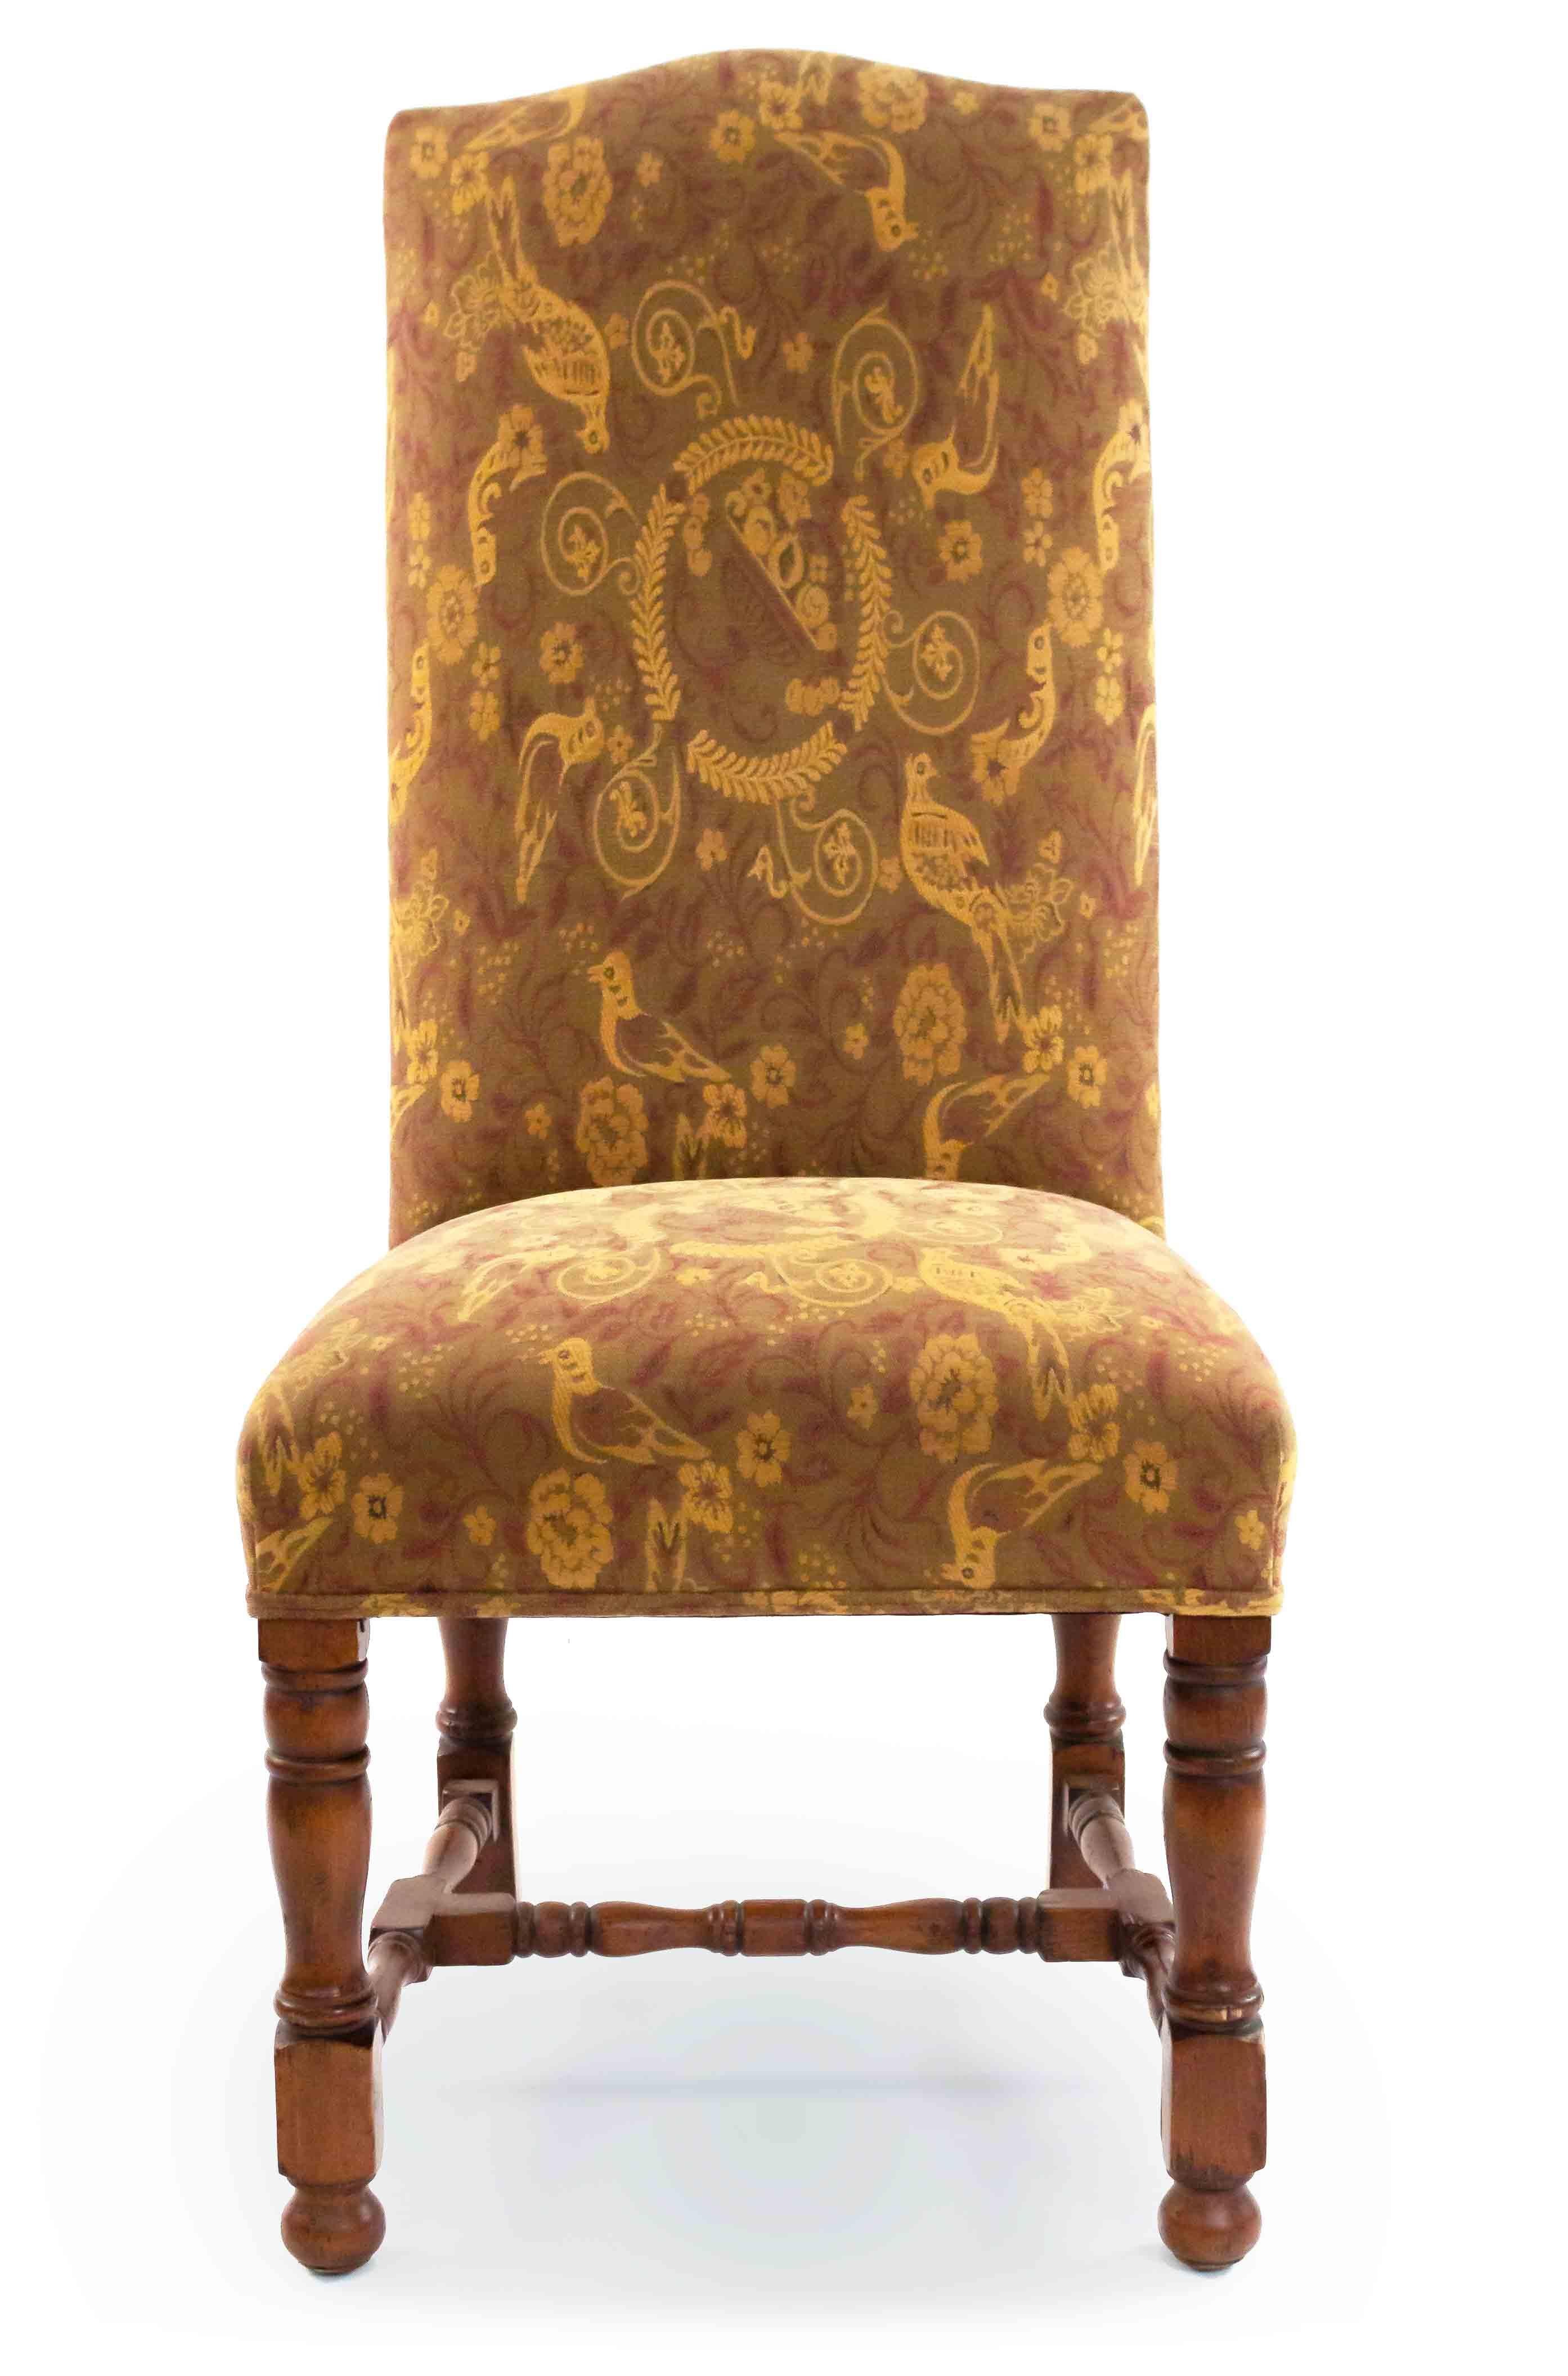 Pair of English Renaissance-style high back dining chairs with floral gold and beige upholstery with a swirling bird motif. Wooden turned legs and stretcher on small bun feet.